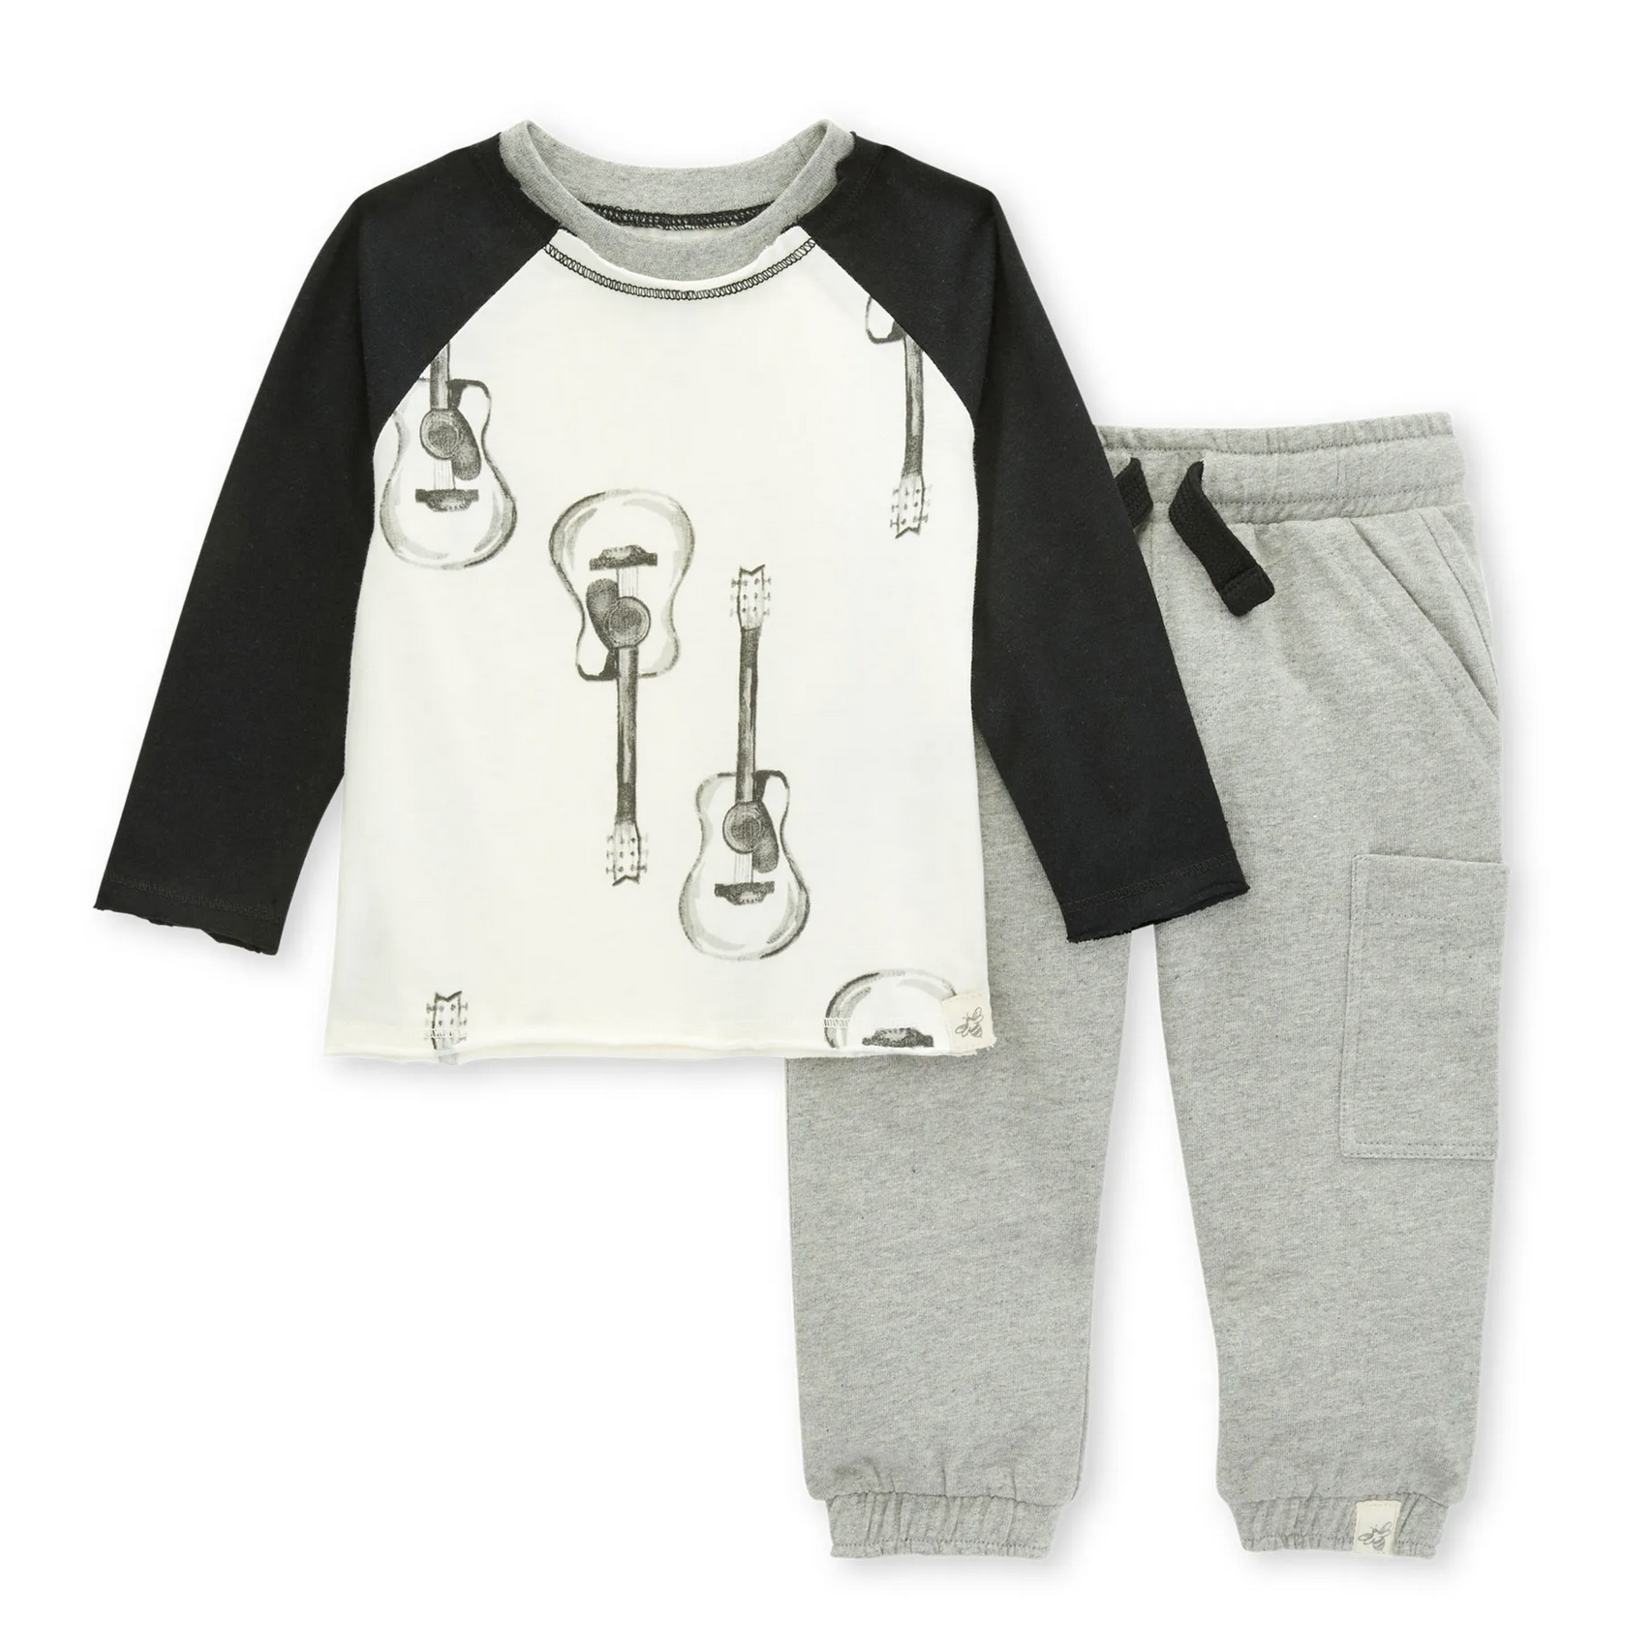 Burt's Bees Accoustic Guitar Tee & French Terry Pant Set